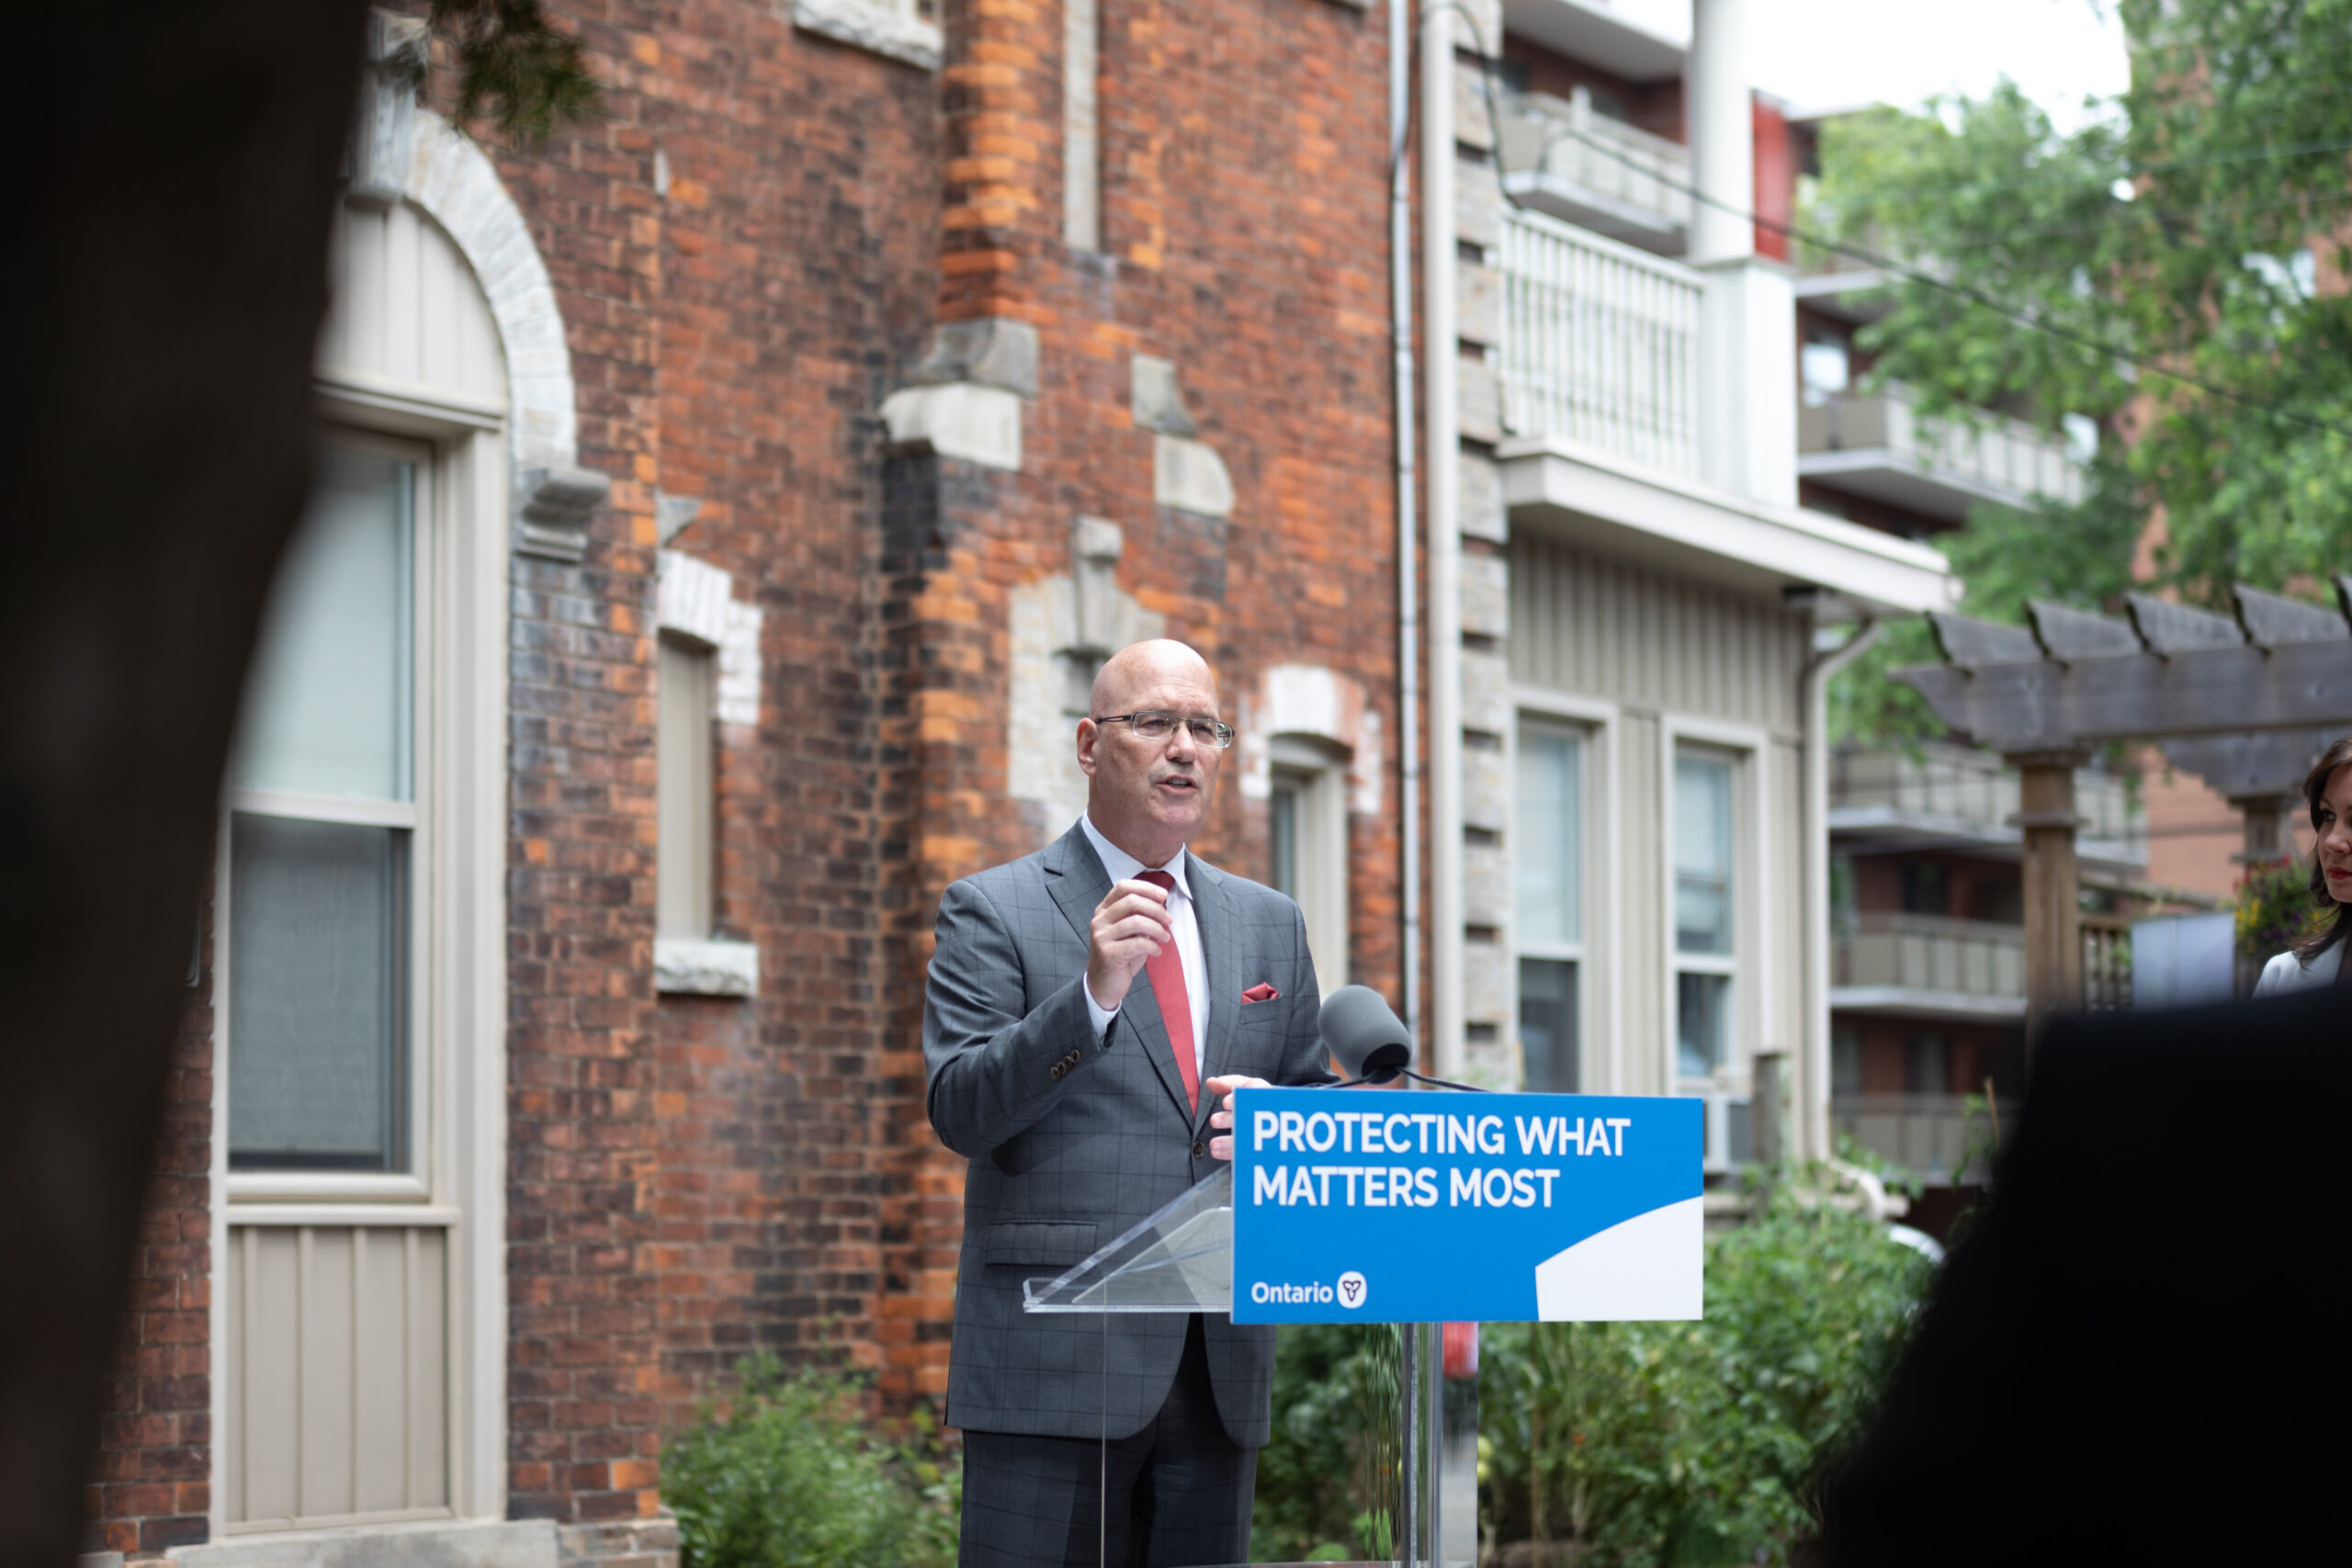 Municipal Affairs and Housing Minister Steve Clark speaks at an event. Clark didn't consult Indigenous communities on the Ontario housing bill (Bill 23).